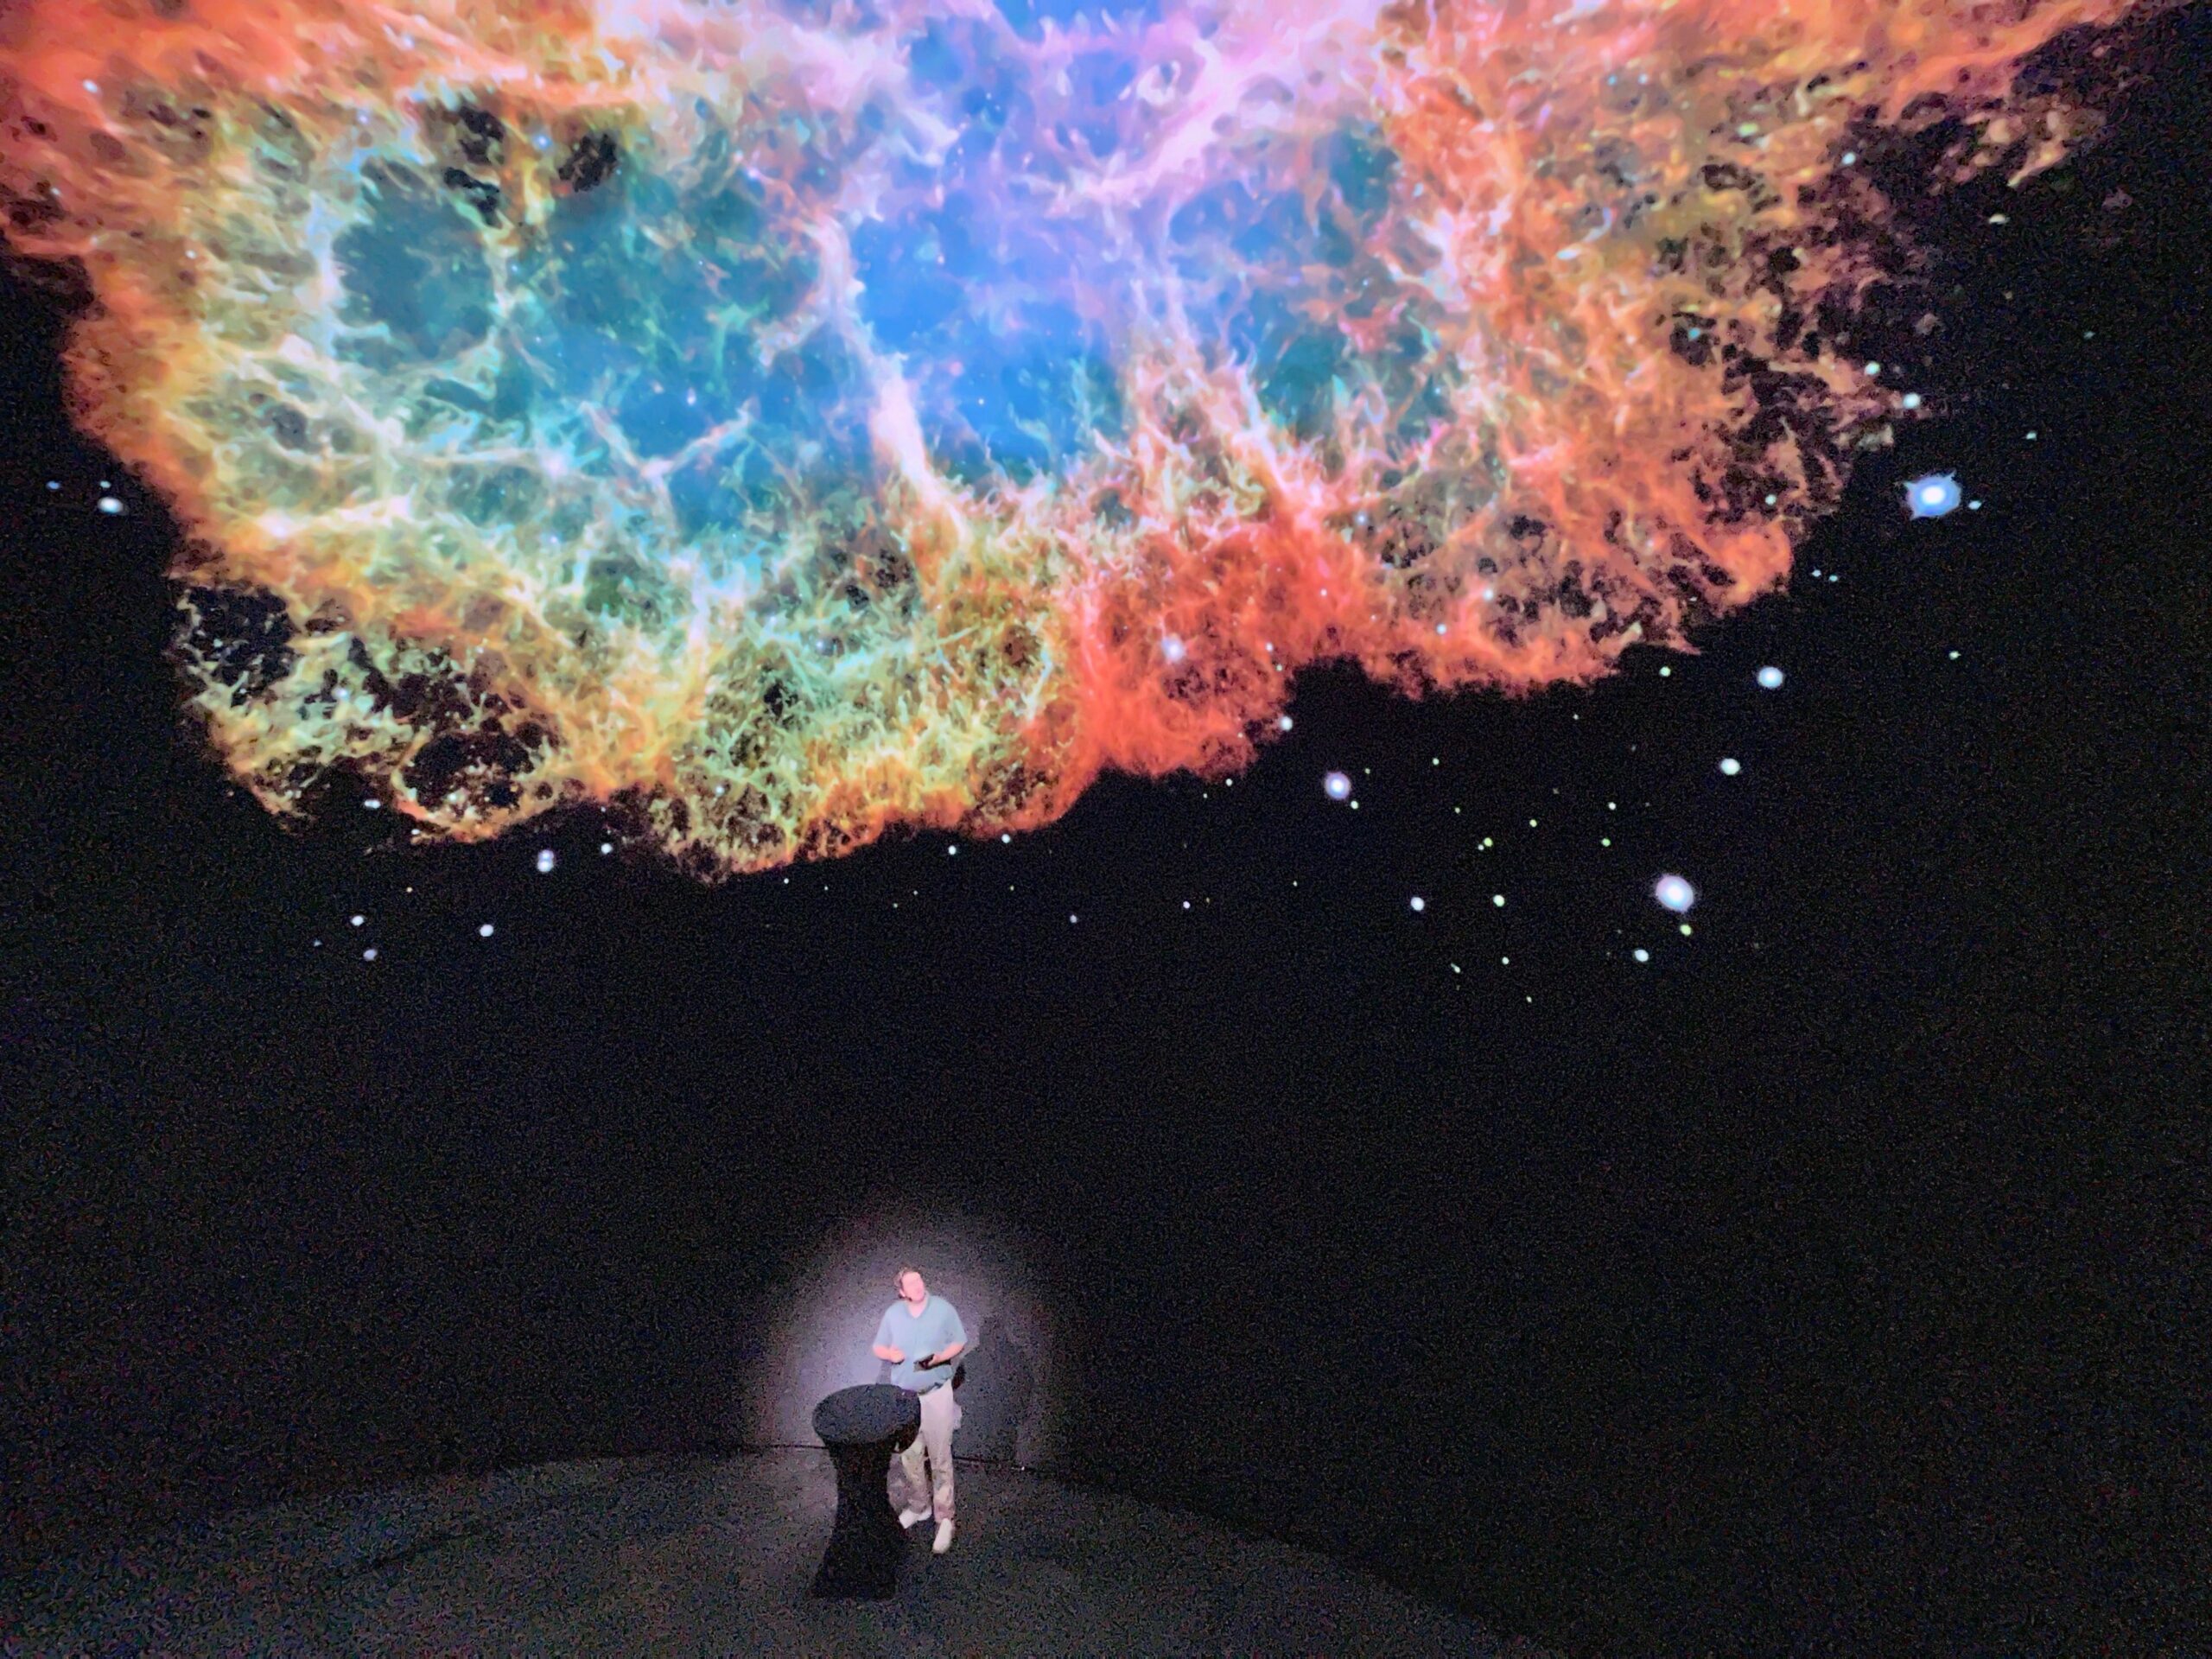 Ian McLennan in front of the LED dome at the Cosm Experience Center. Image courtesy Derek Threinen.